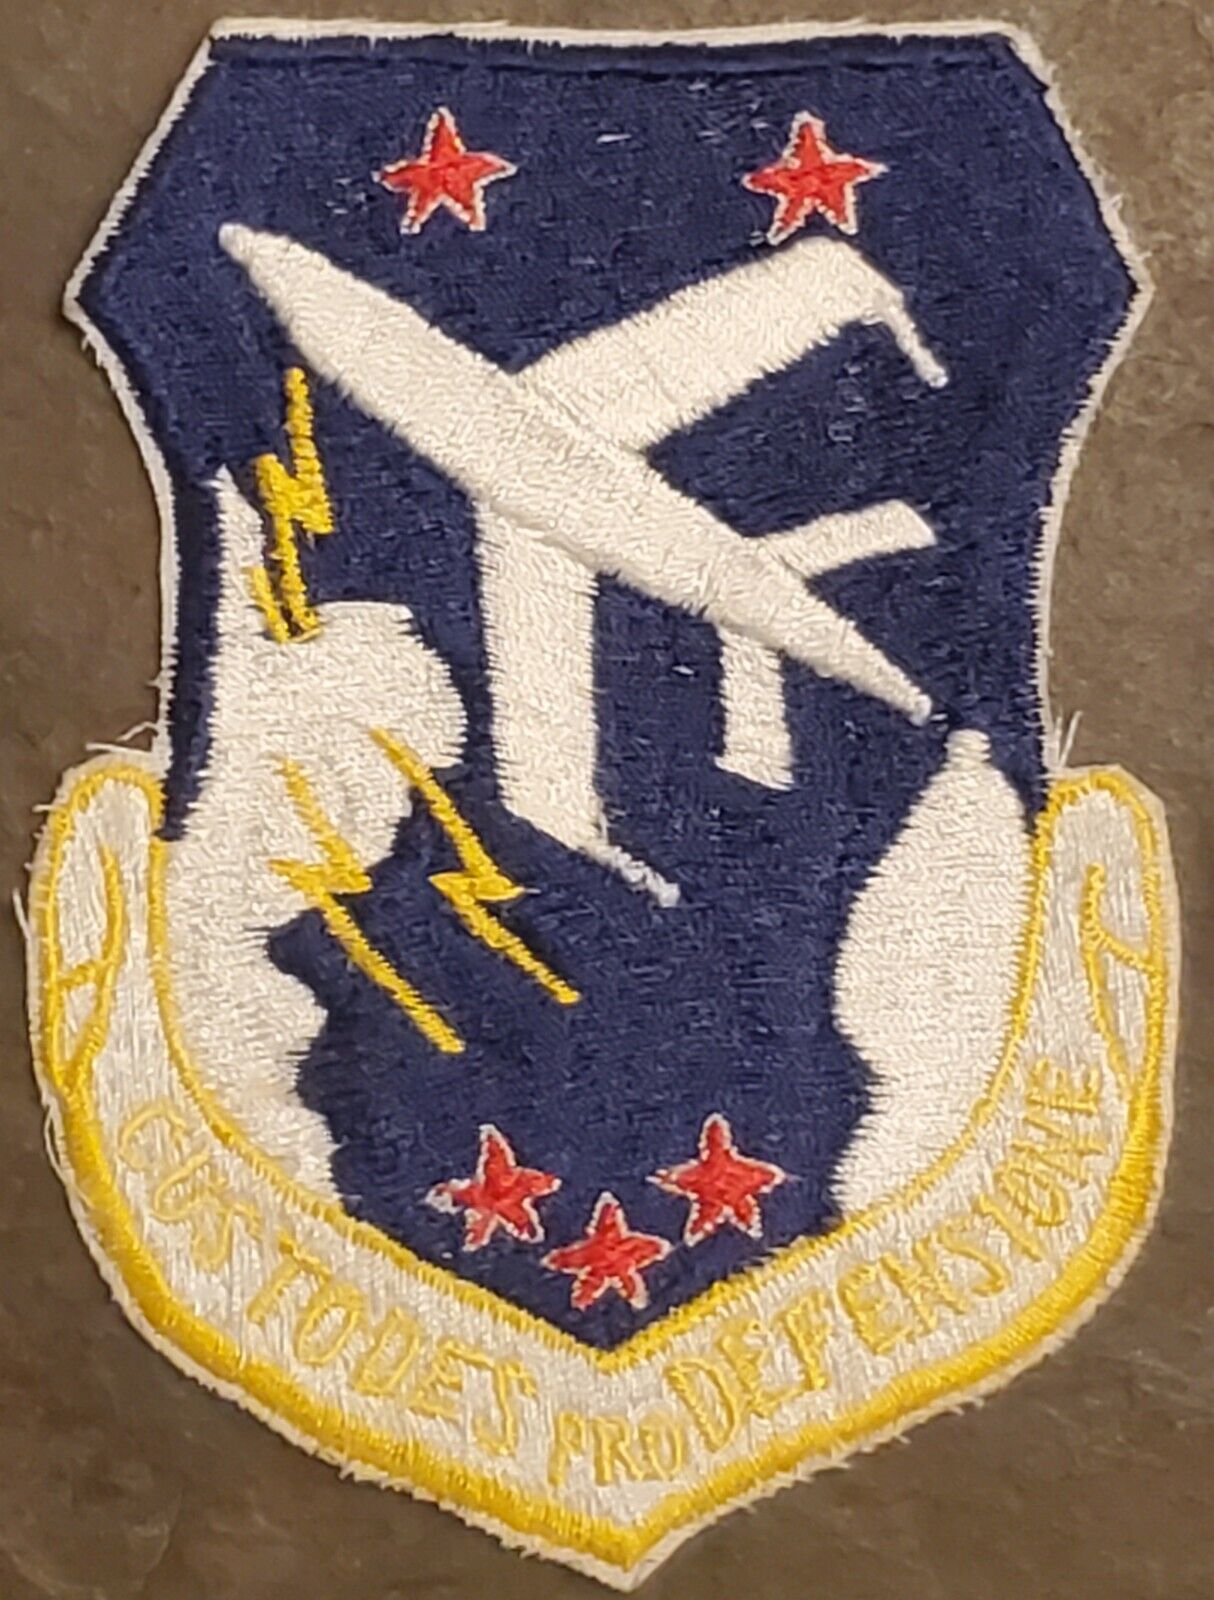 USAF AIR FORCE 113th Tactical Fighter Wing \'Capital Guardians) Patch OLDER RARE